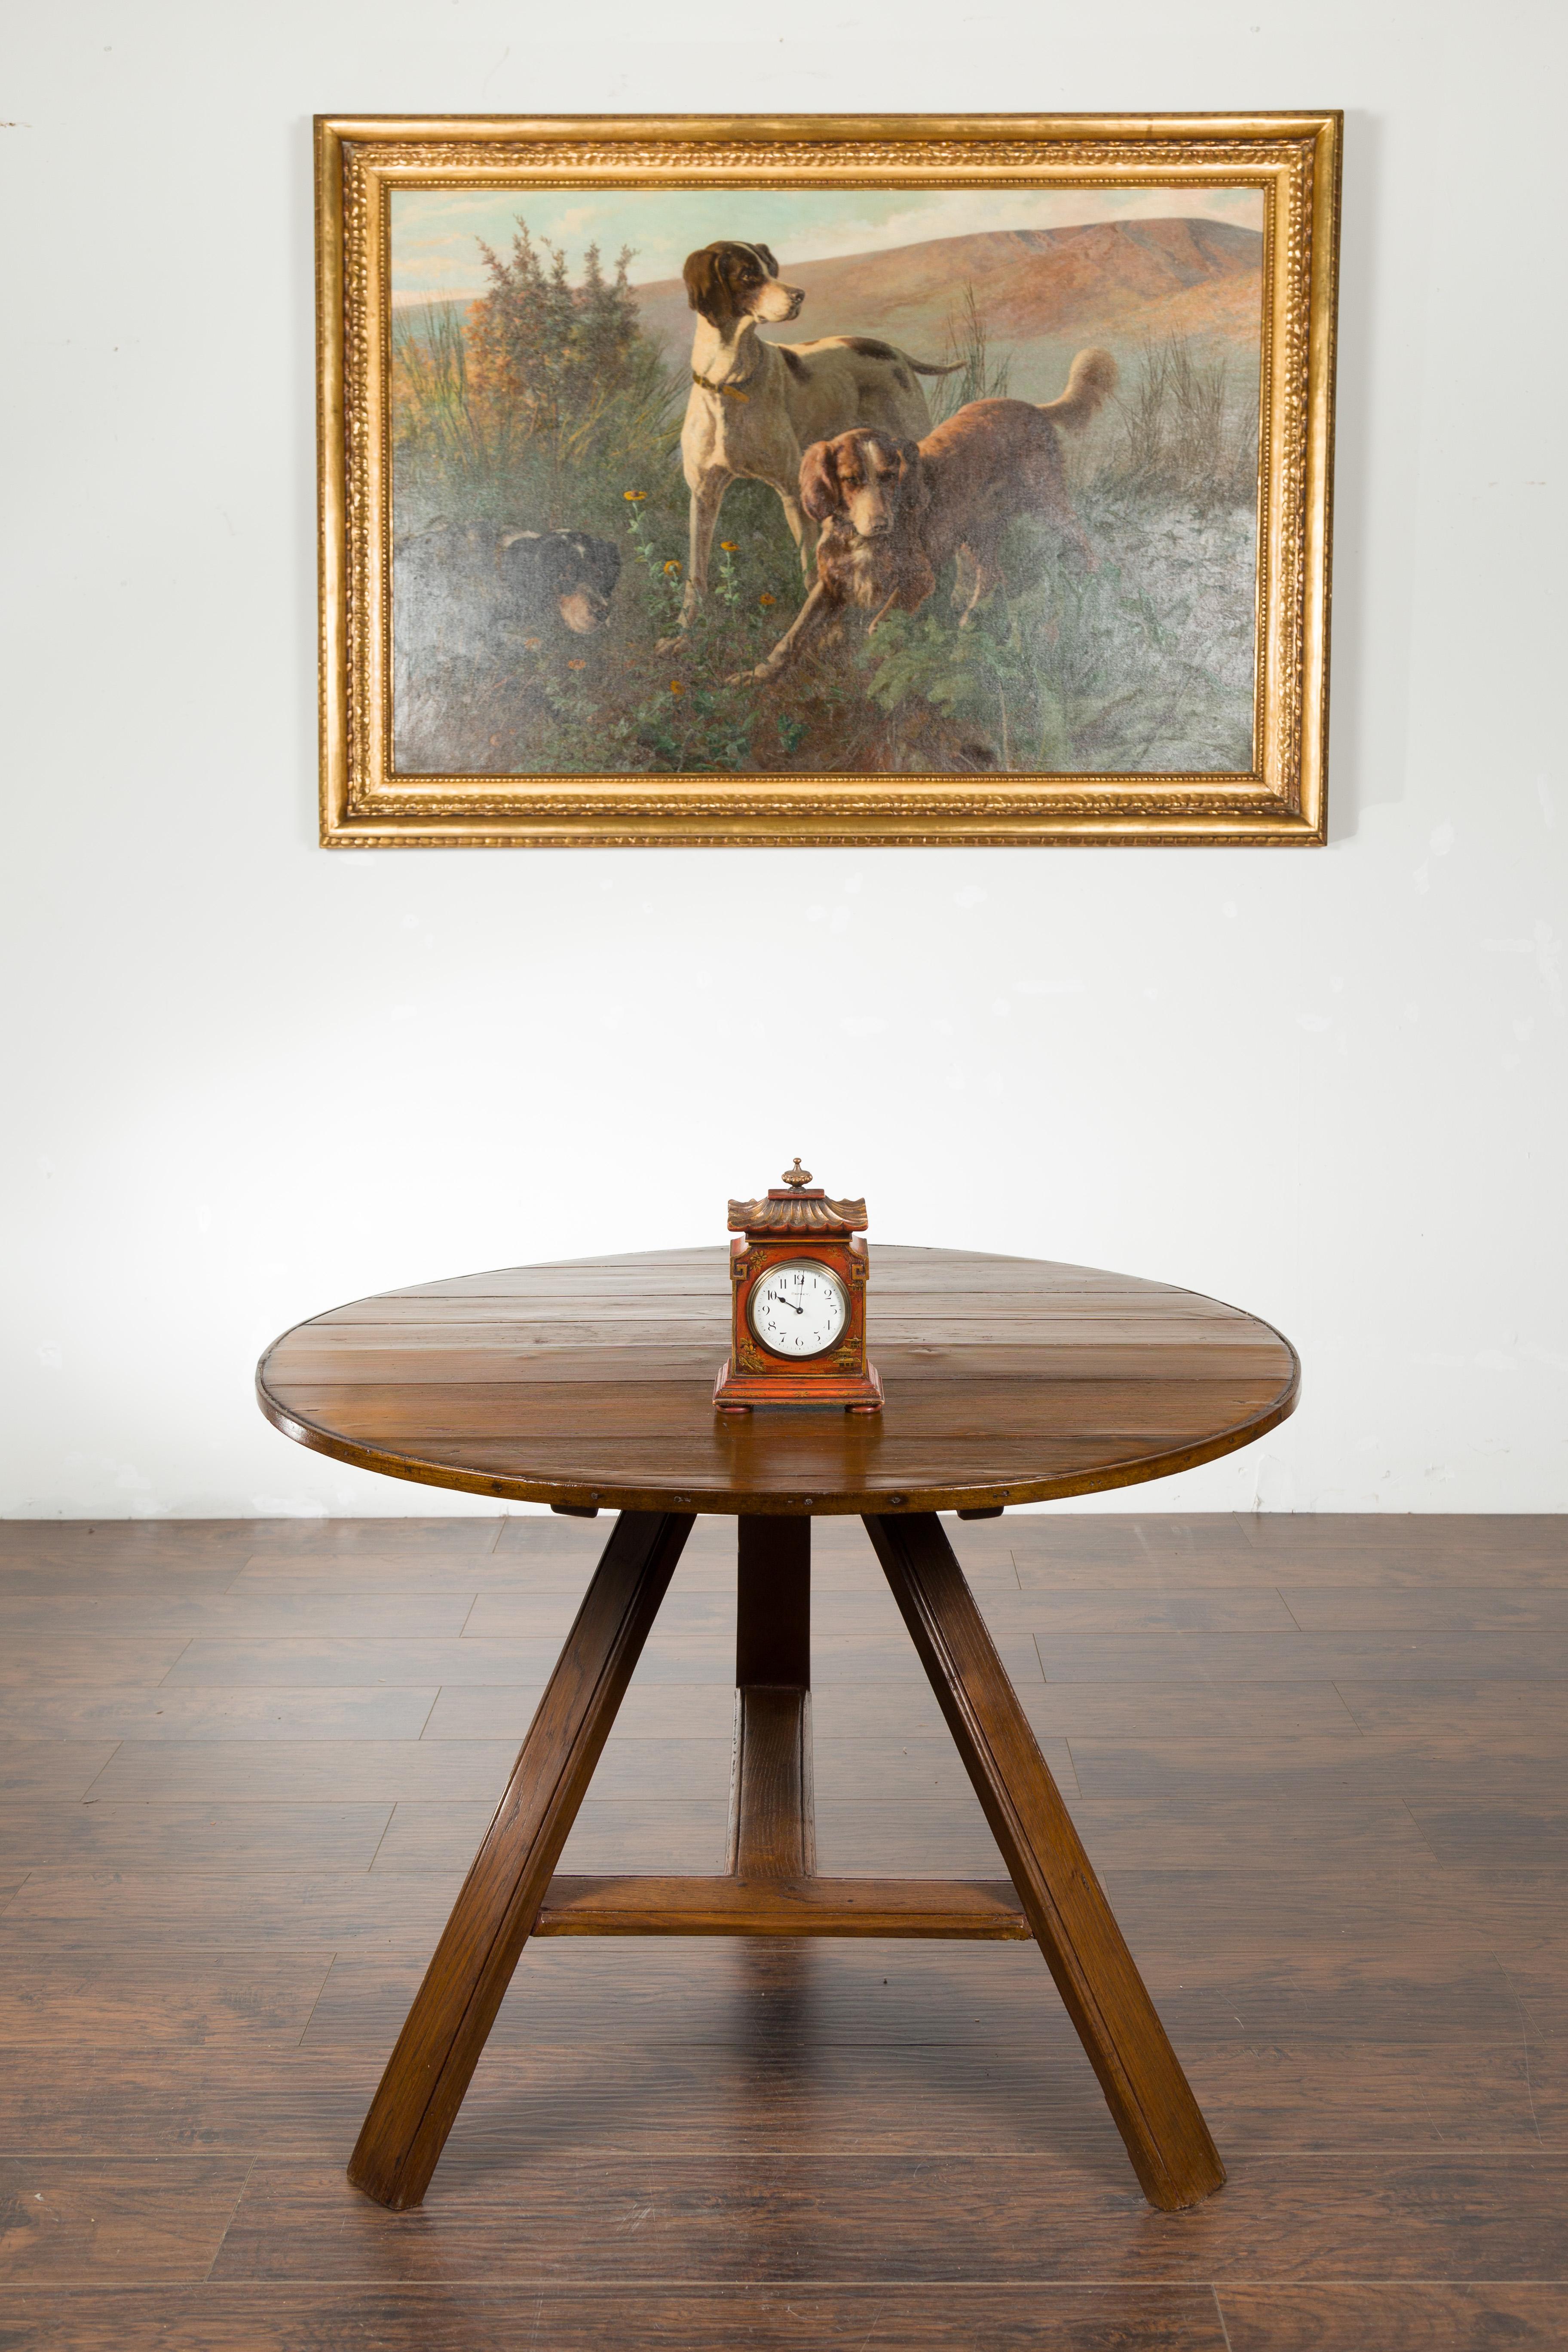 An English Asprey London painted wood mantel clock from the mid 20th century, with gilt Chinoiserie motifs and pagoda roof. Created in England during the second quarter of the 20th century, this Asprey painted clock captures our attention with its